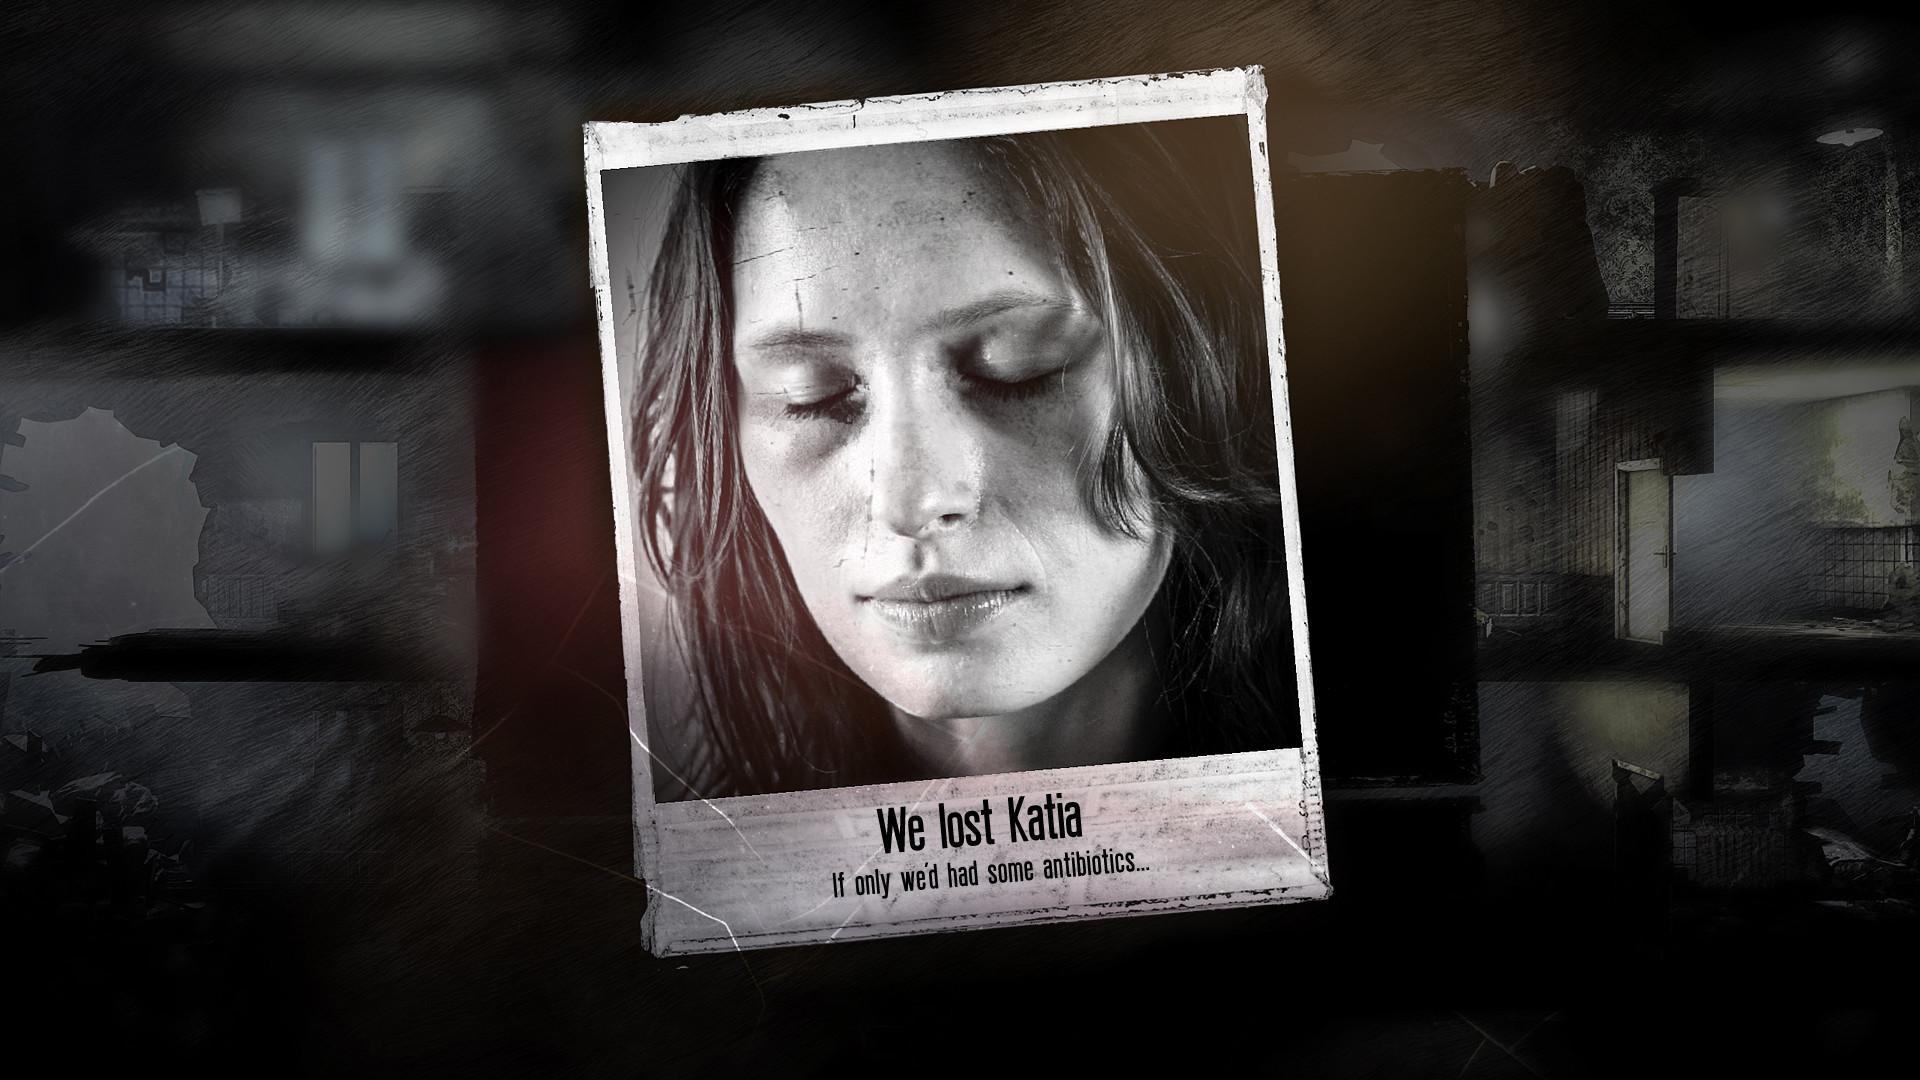 Screenshot №9 from game This War of Mine